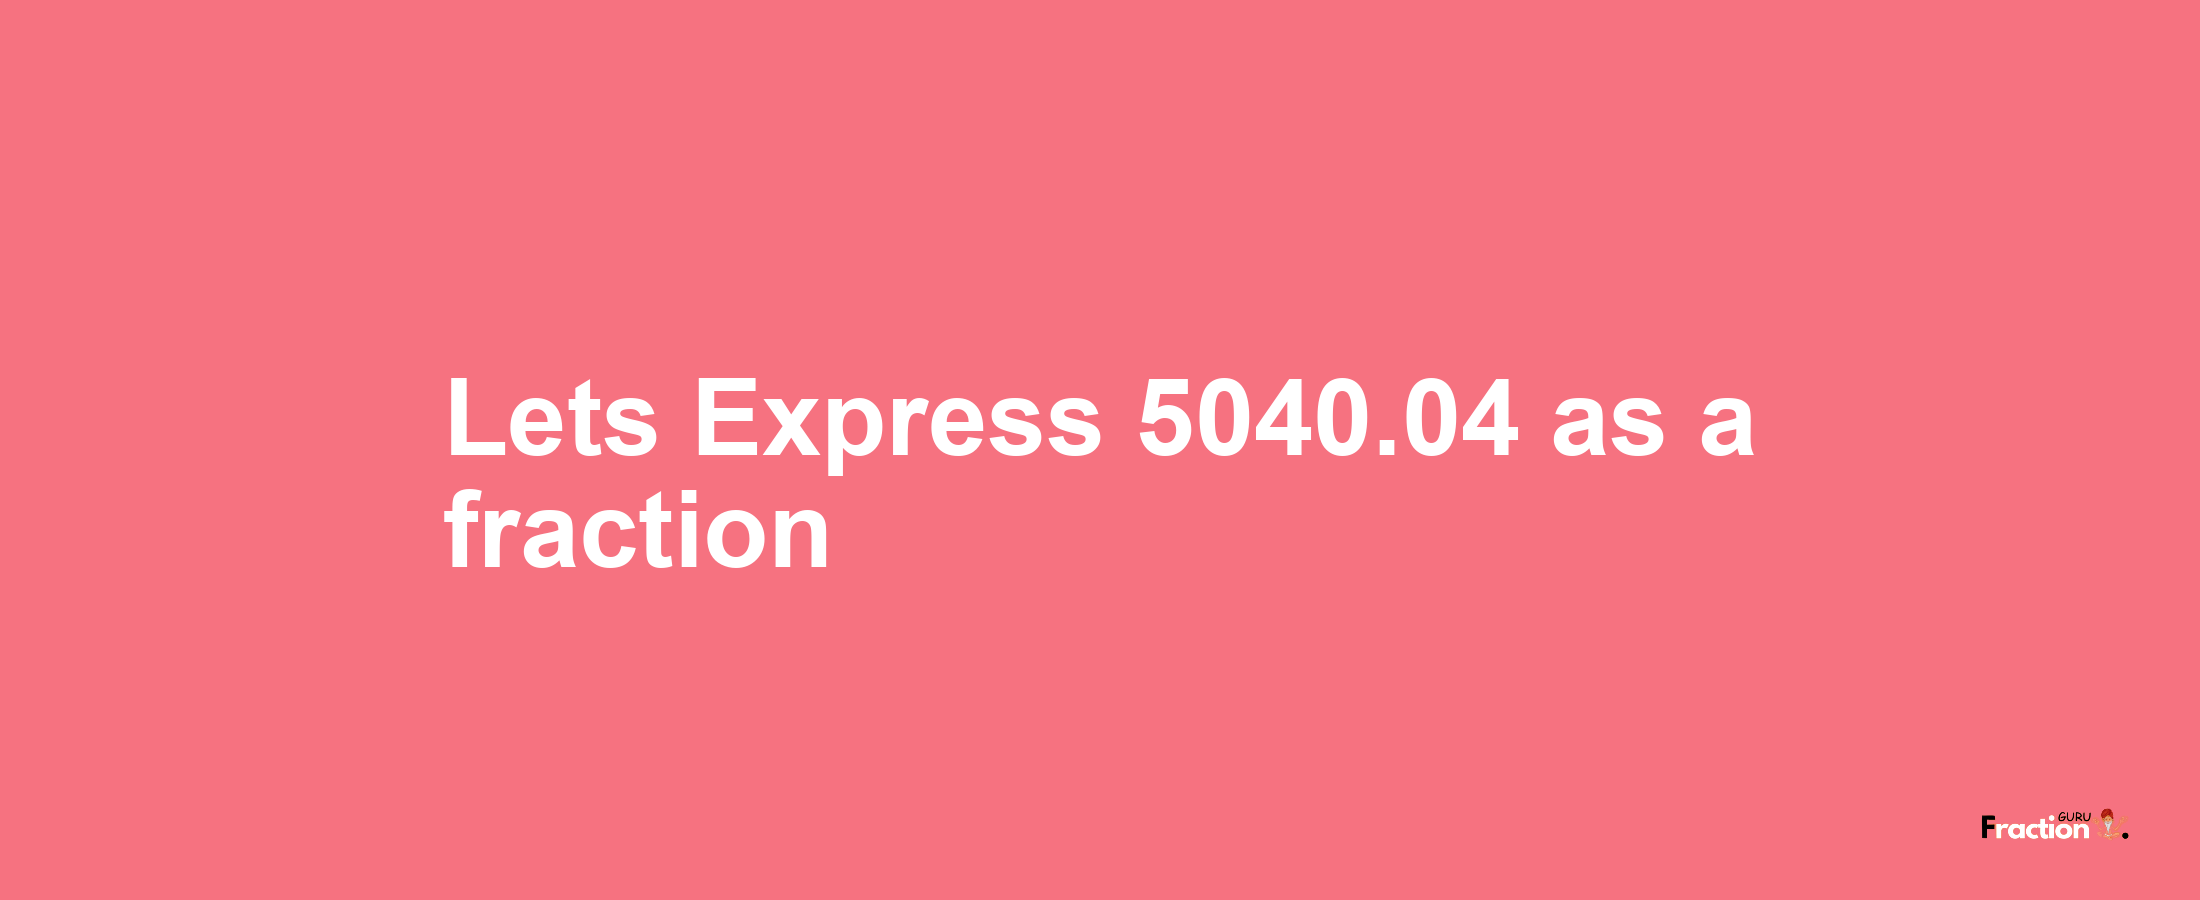 Lets Express 5040.04 as afraction